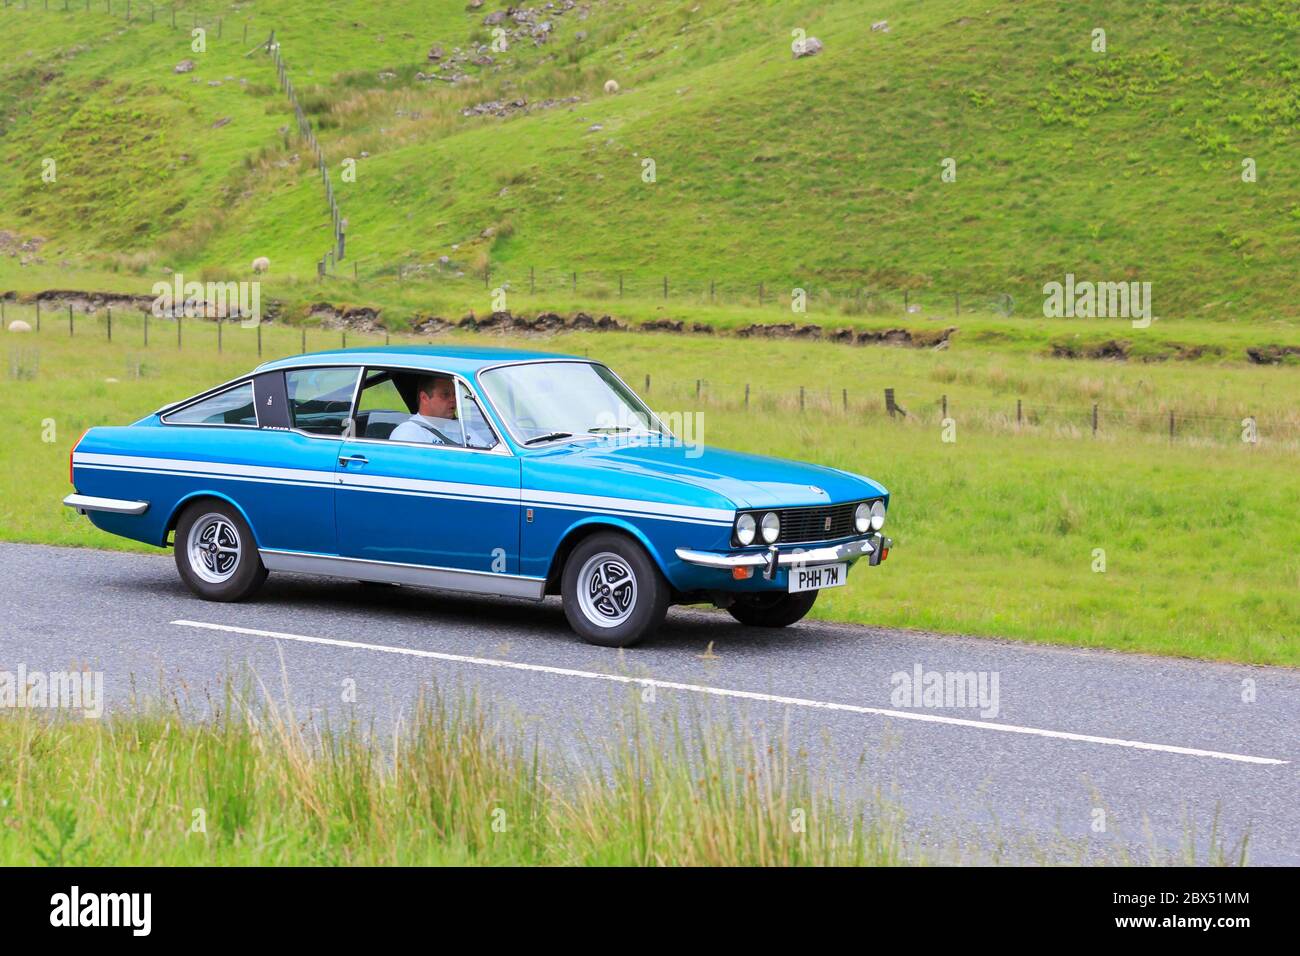 MOFFAT, SCOTLAND - JUNE 29, 2019: 1973 Sunbeam Rapier H120 car in a classic car rally en route towards the town of Moffat, Dumfries and Galloway Stock Photo